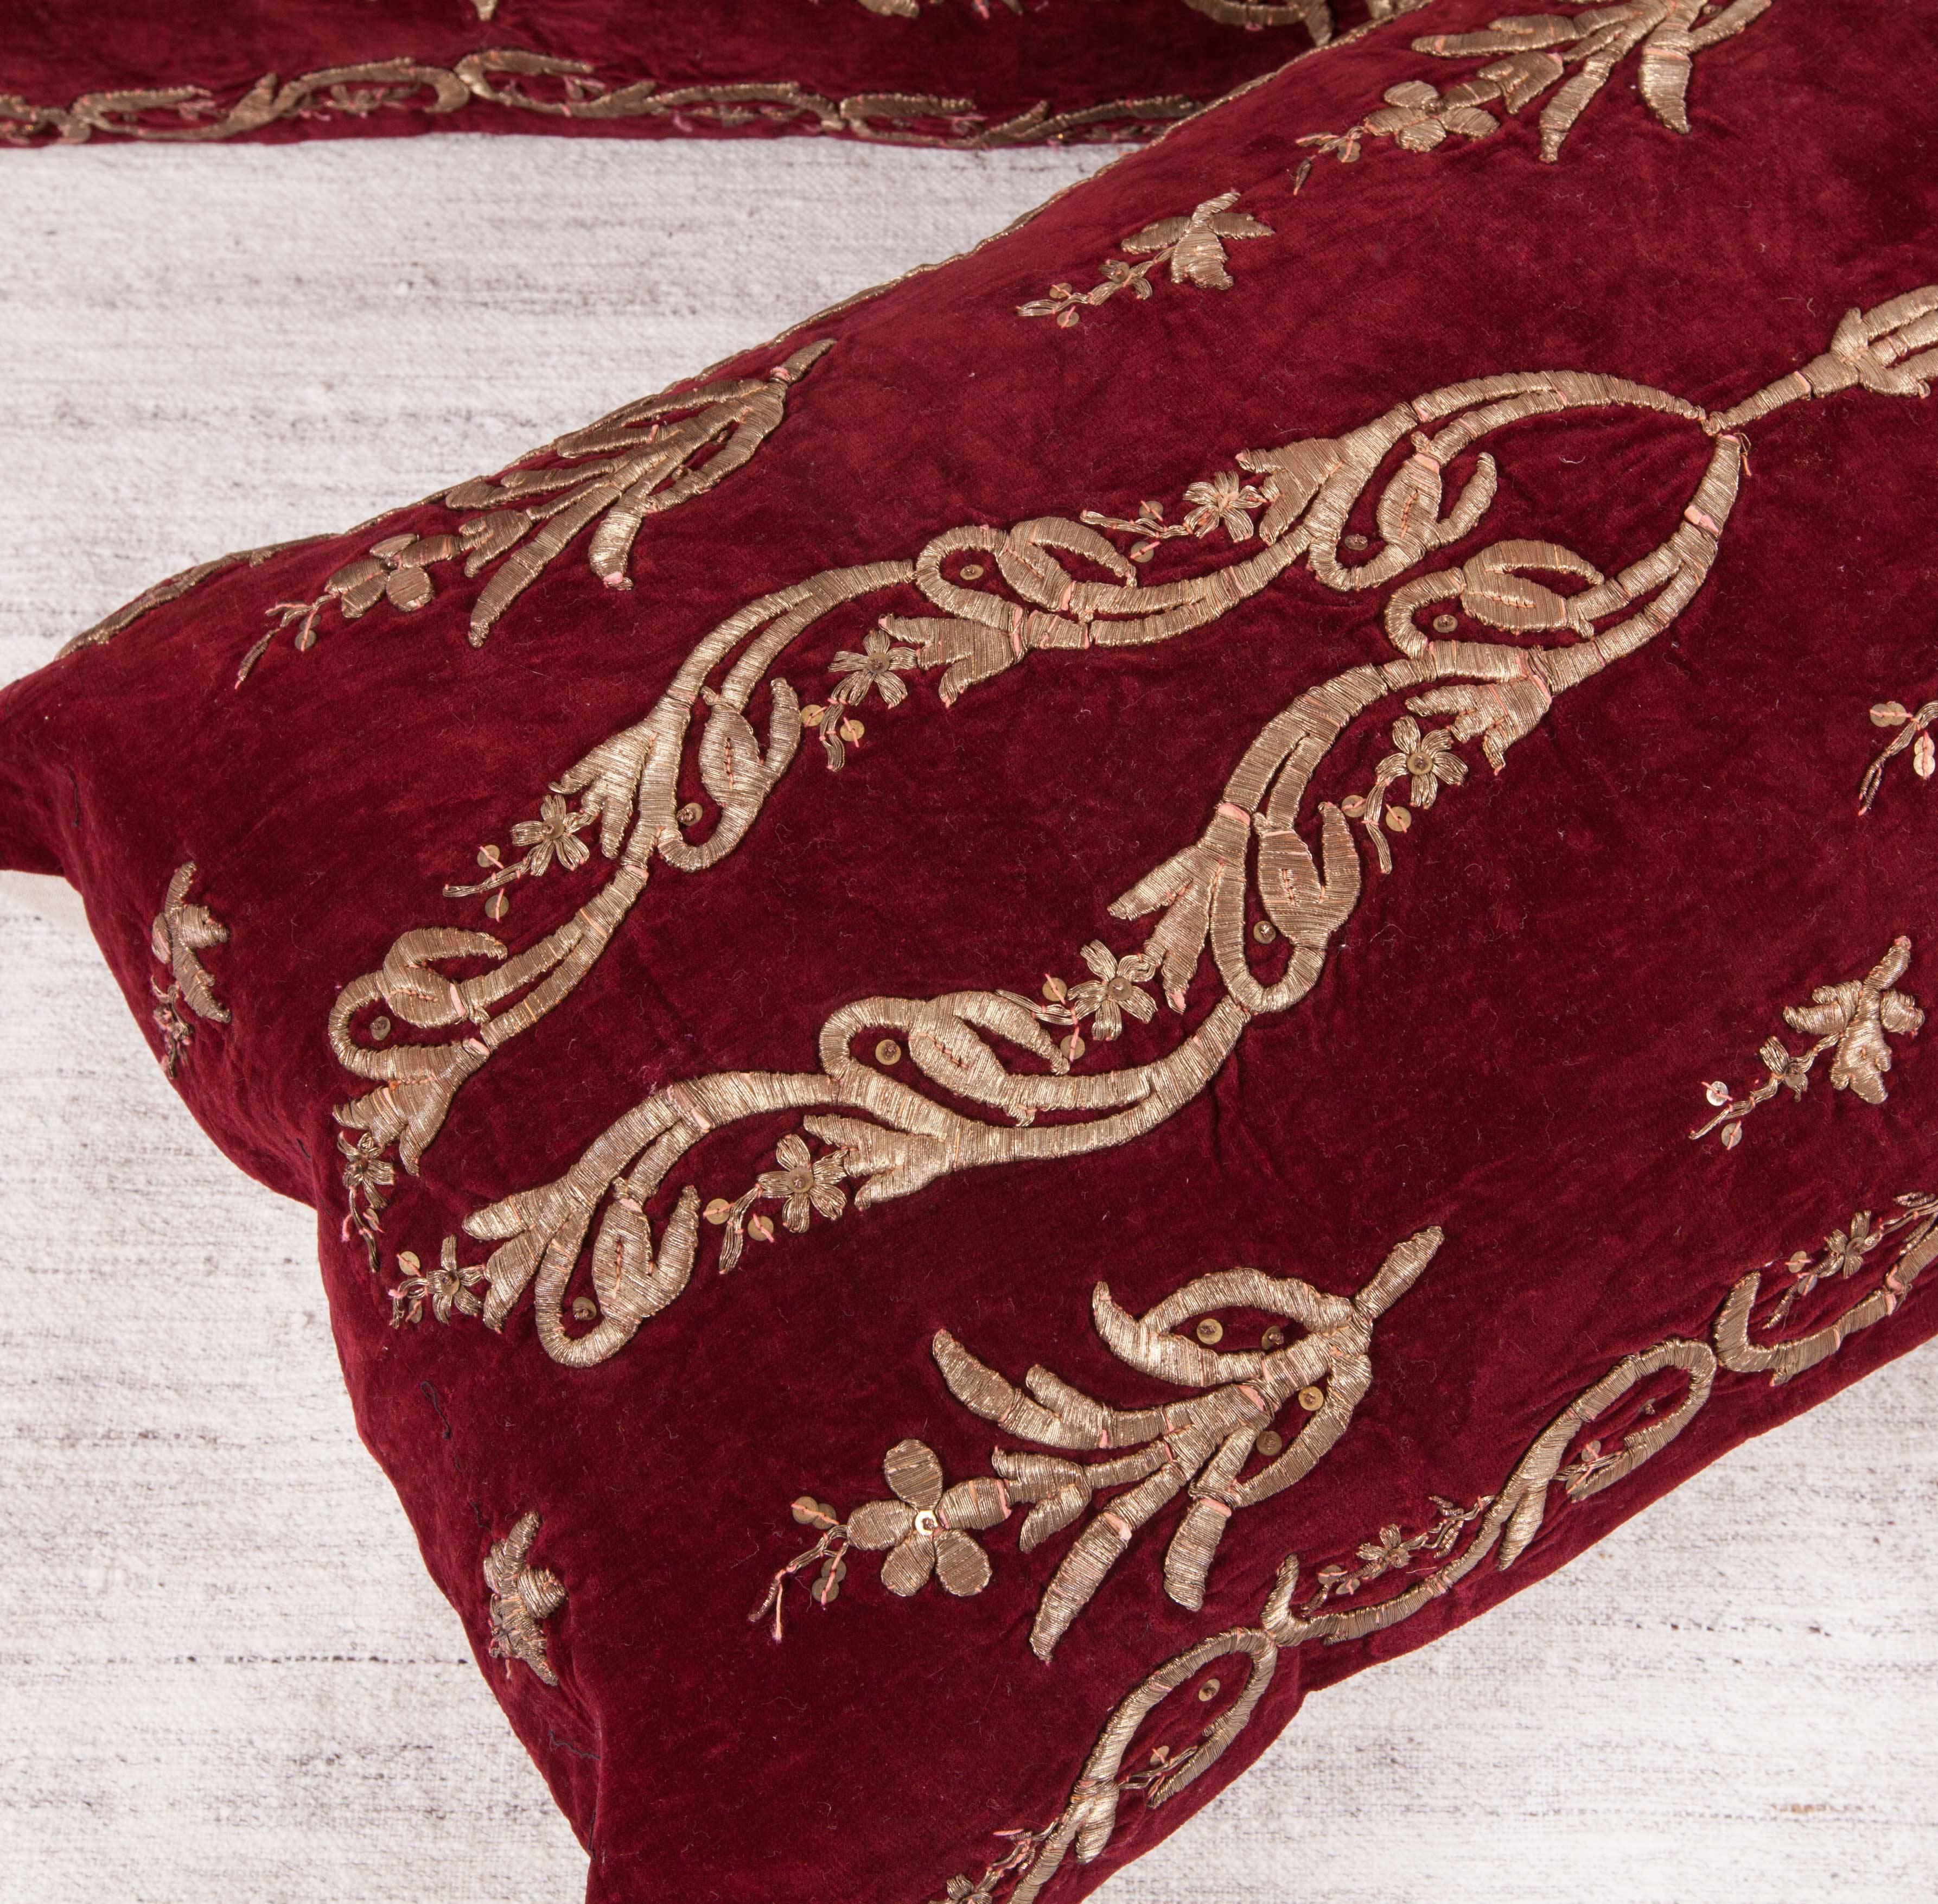 Islamic Pillow Cases Fashioned from Late 19th Century Ottoman Turkish Sarma Velvet